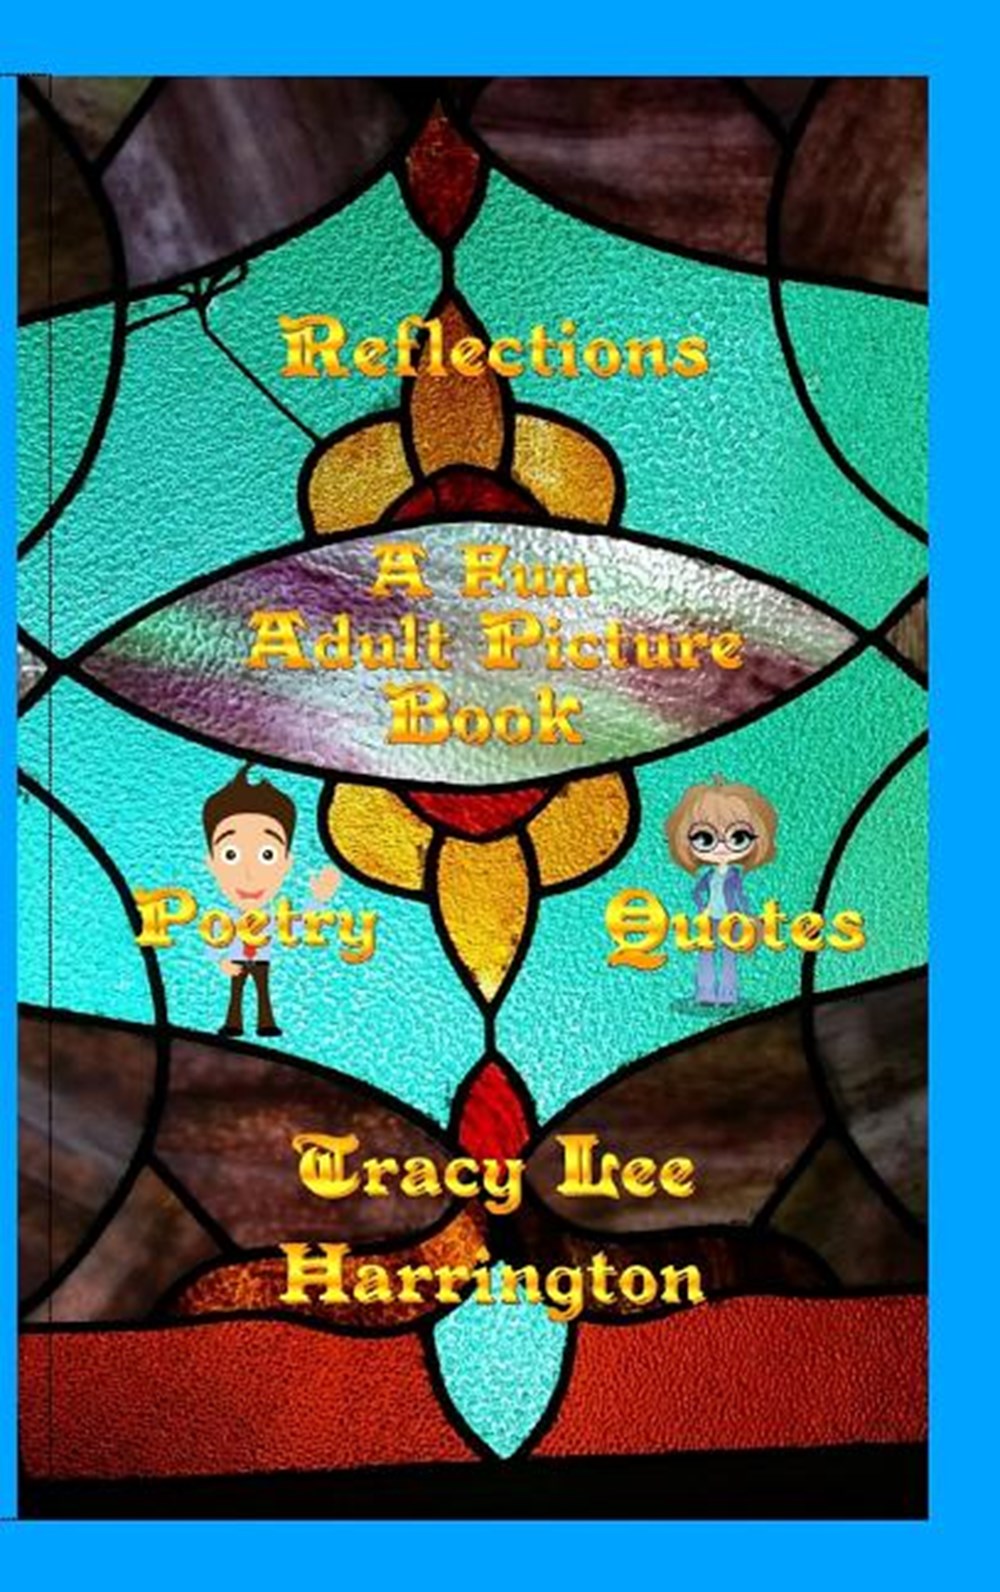 Reflections Fun Adult Picture Book Quotes and Poetry